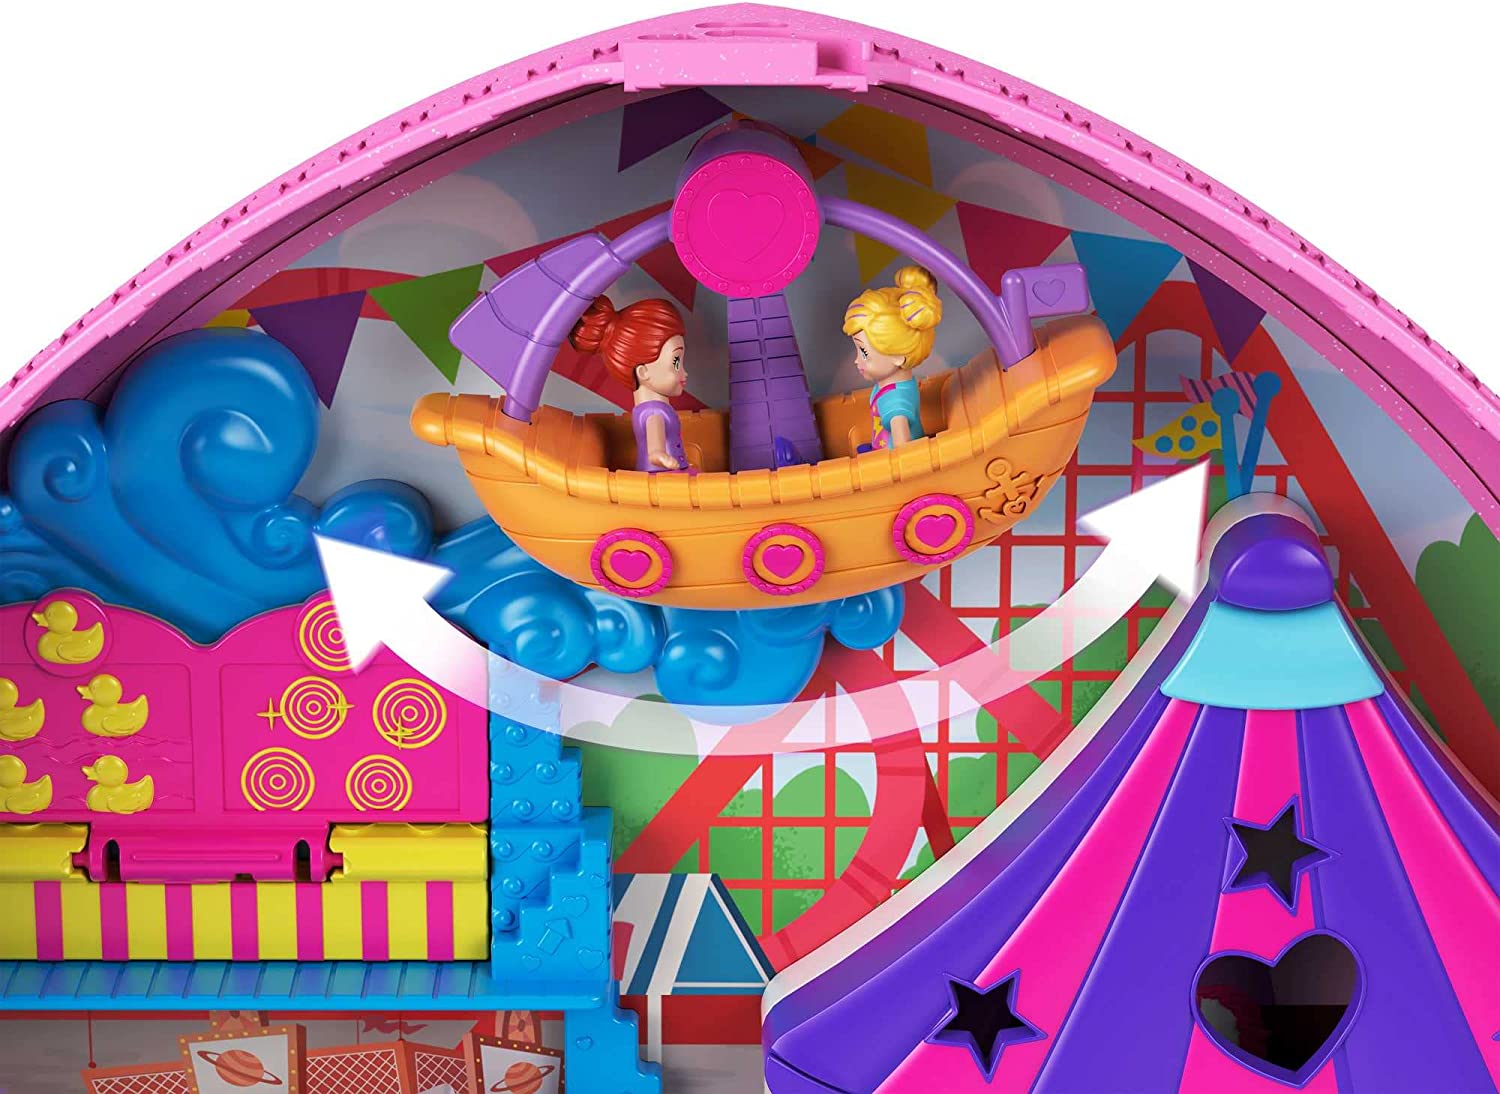 Polly Pocket 2-In-1 Travel Toy Playset - Now Only $18.32!